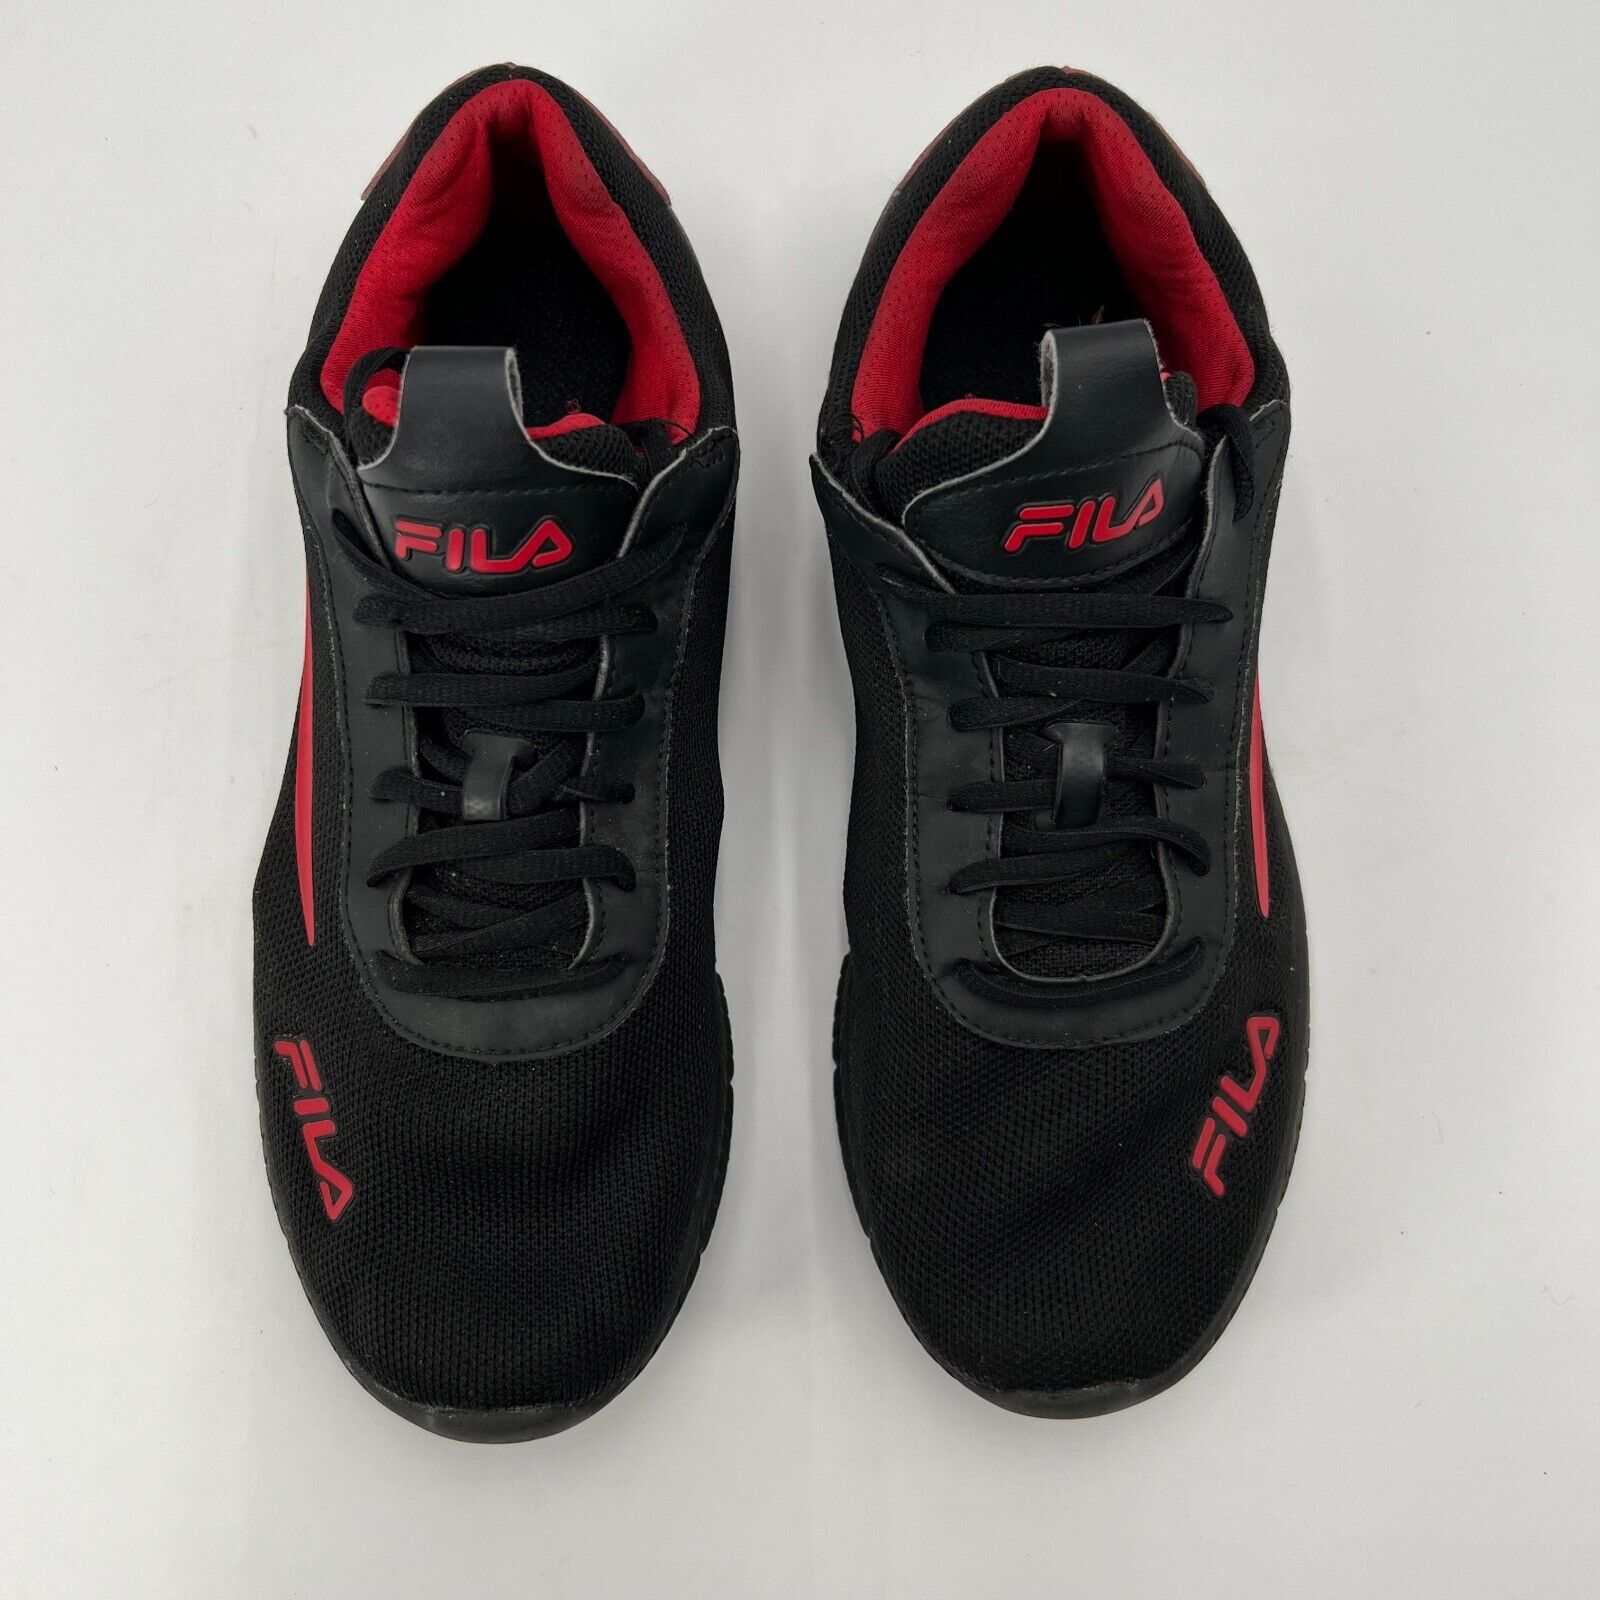 Fila Rare Red Black Oxidation Sneakers Athletic Laced Running Shoe Mens Size 9